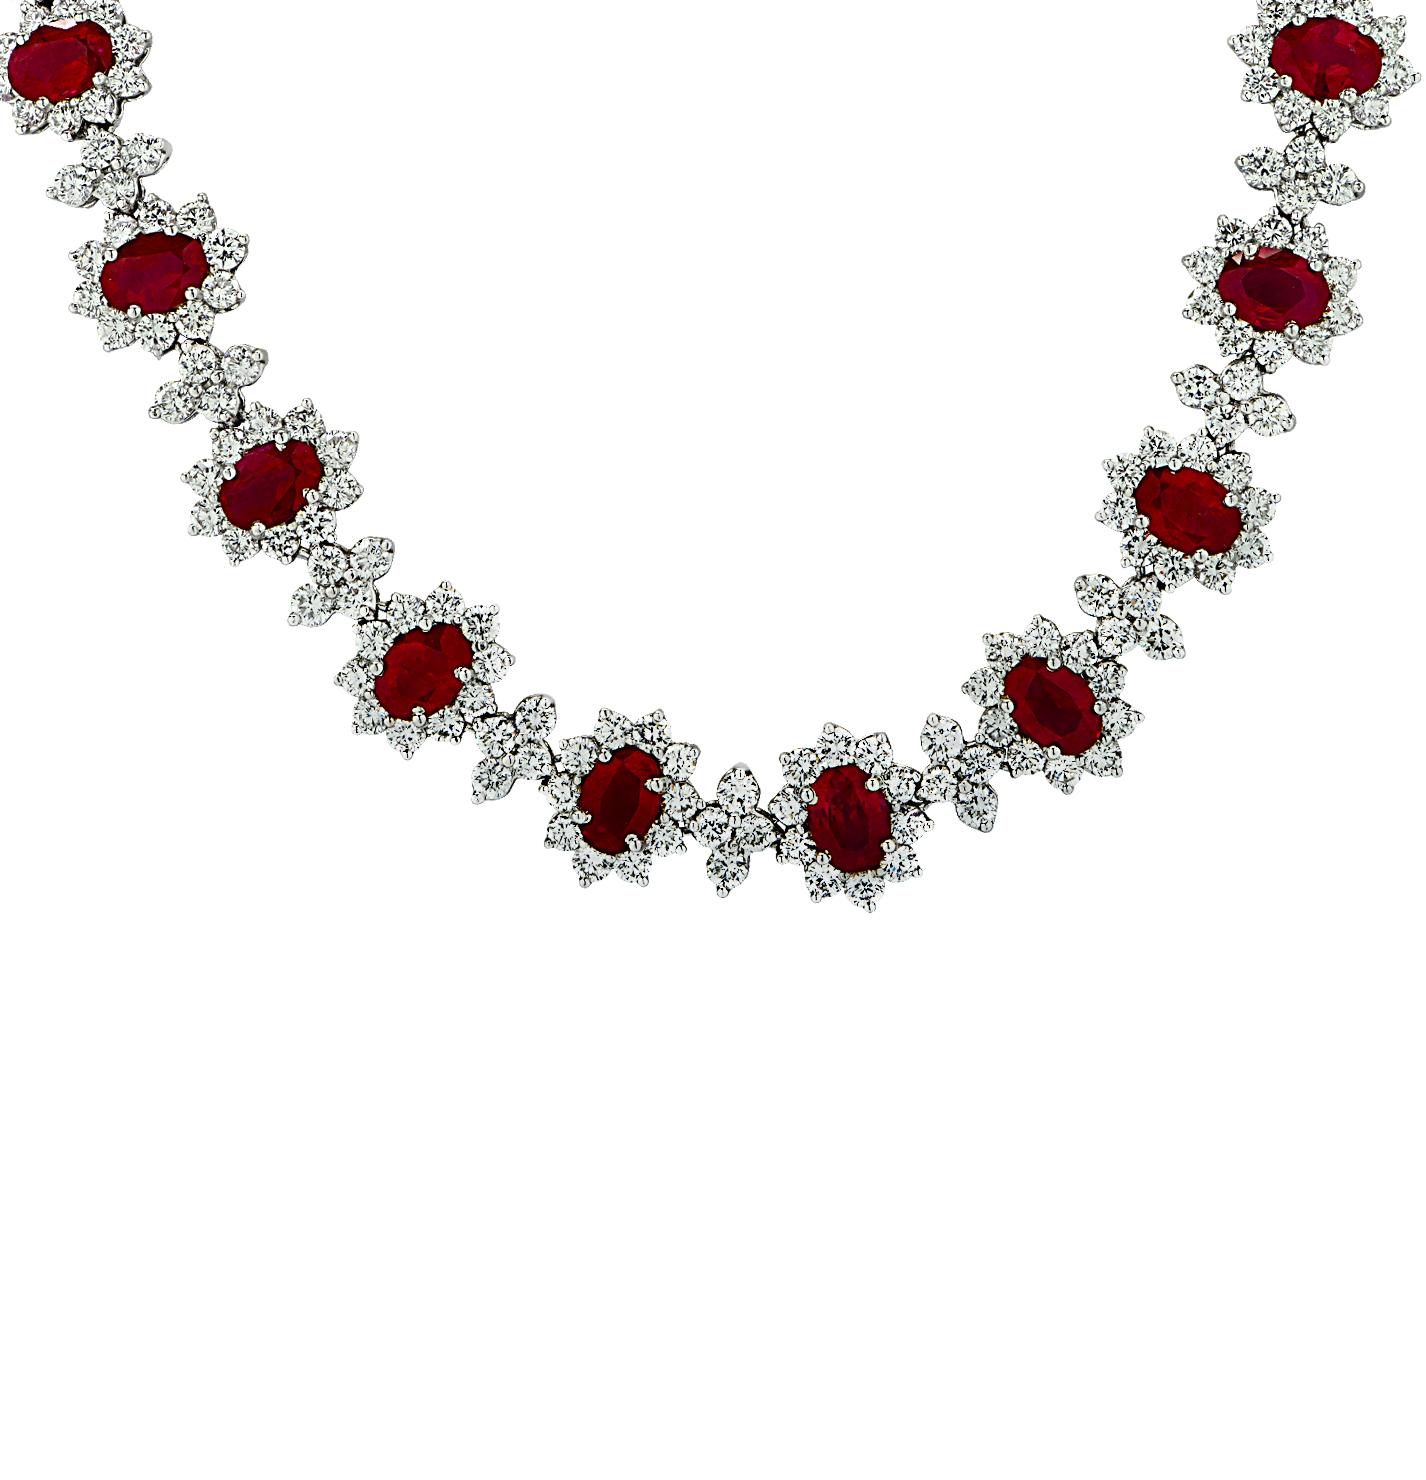 Sensational Diamond and Ruby necklace finely crafted in platinum, featuring Red Burma Rubies and white diamonds weighing approximately 47.25 carats total. This exceptional necklace showcases 406 round brilliant cut diamonds weighing 21.79 carats